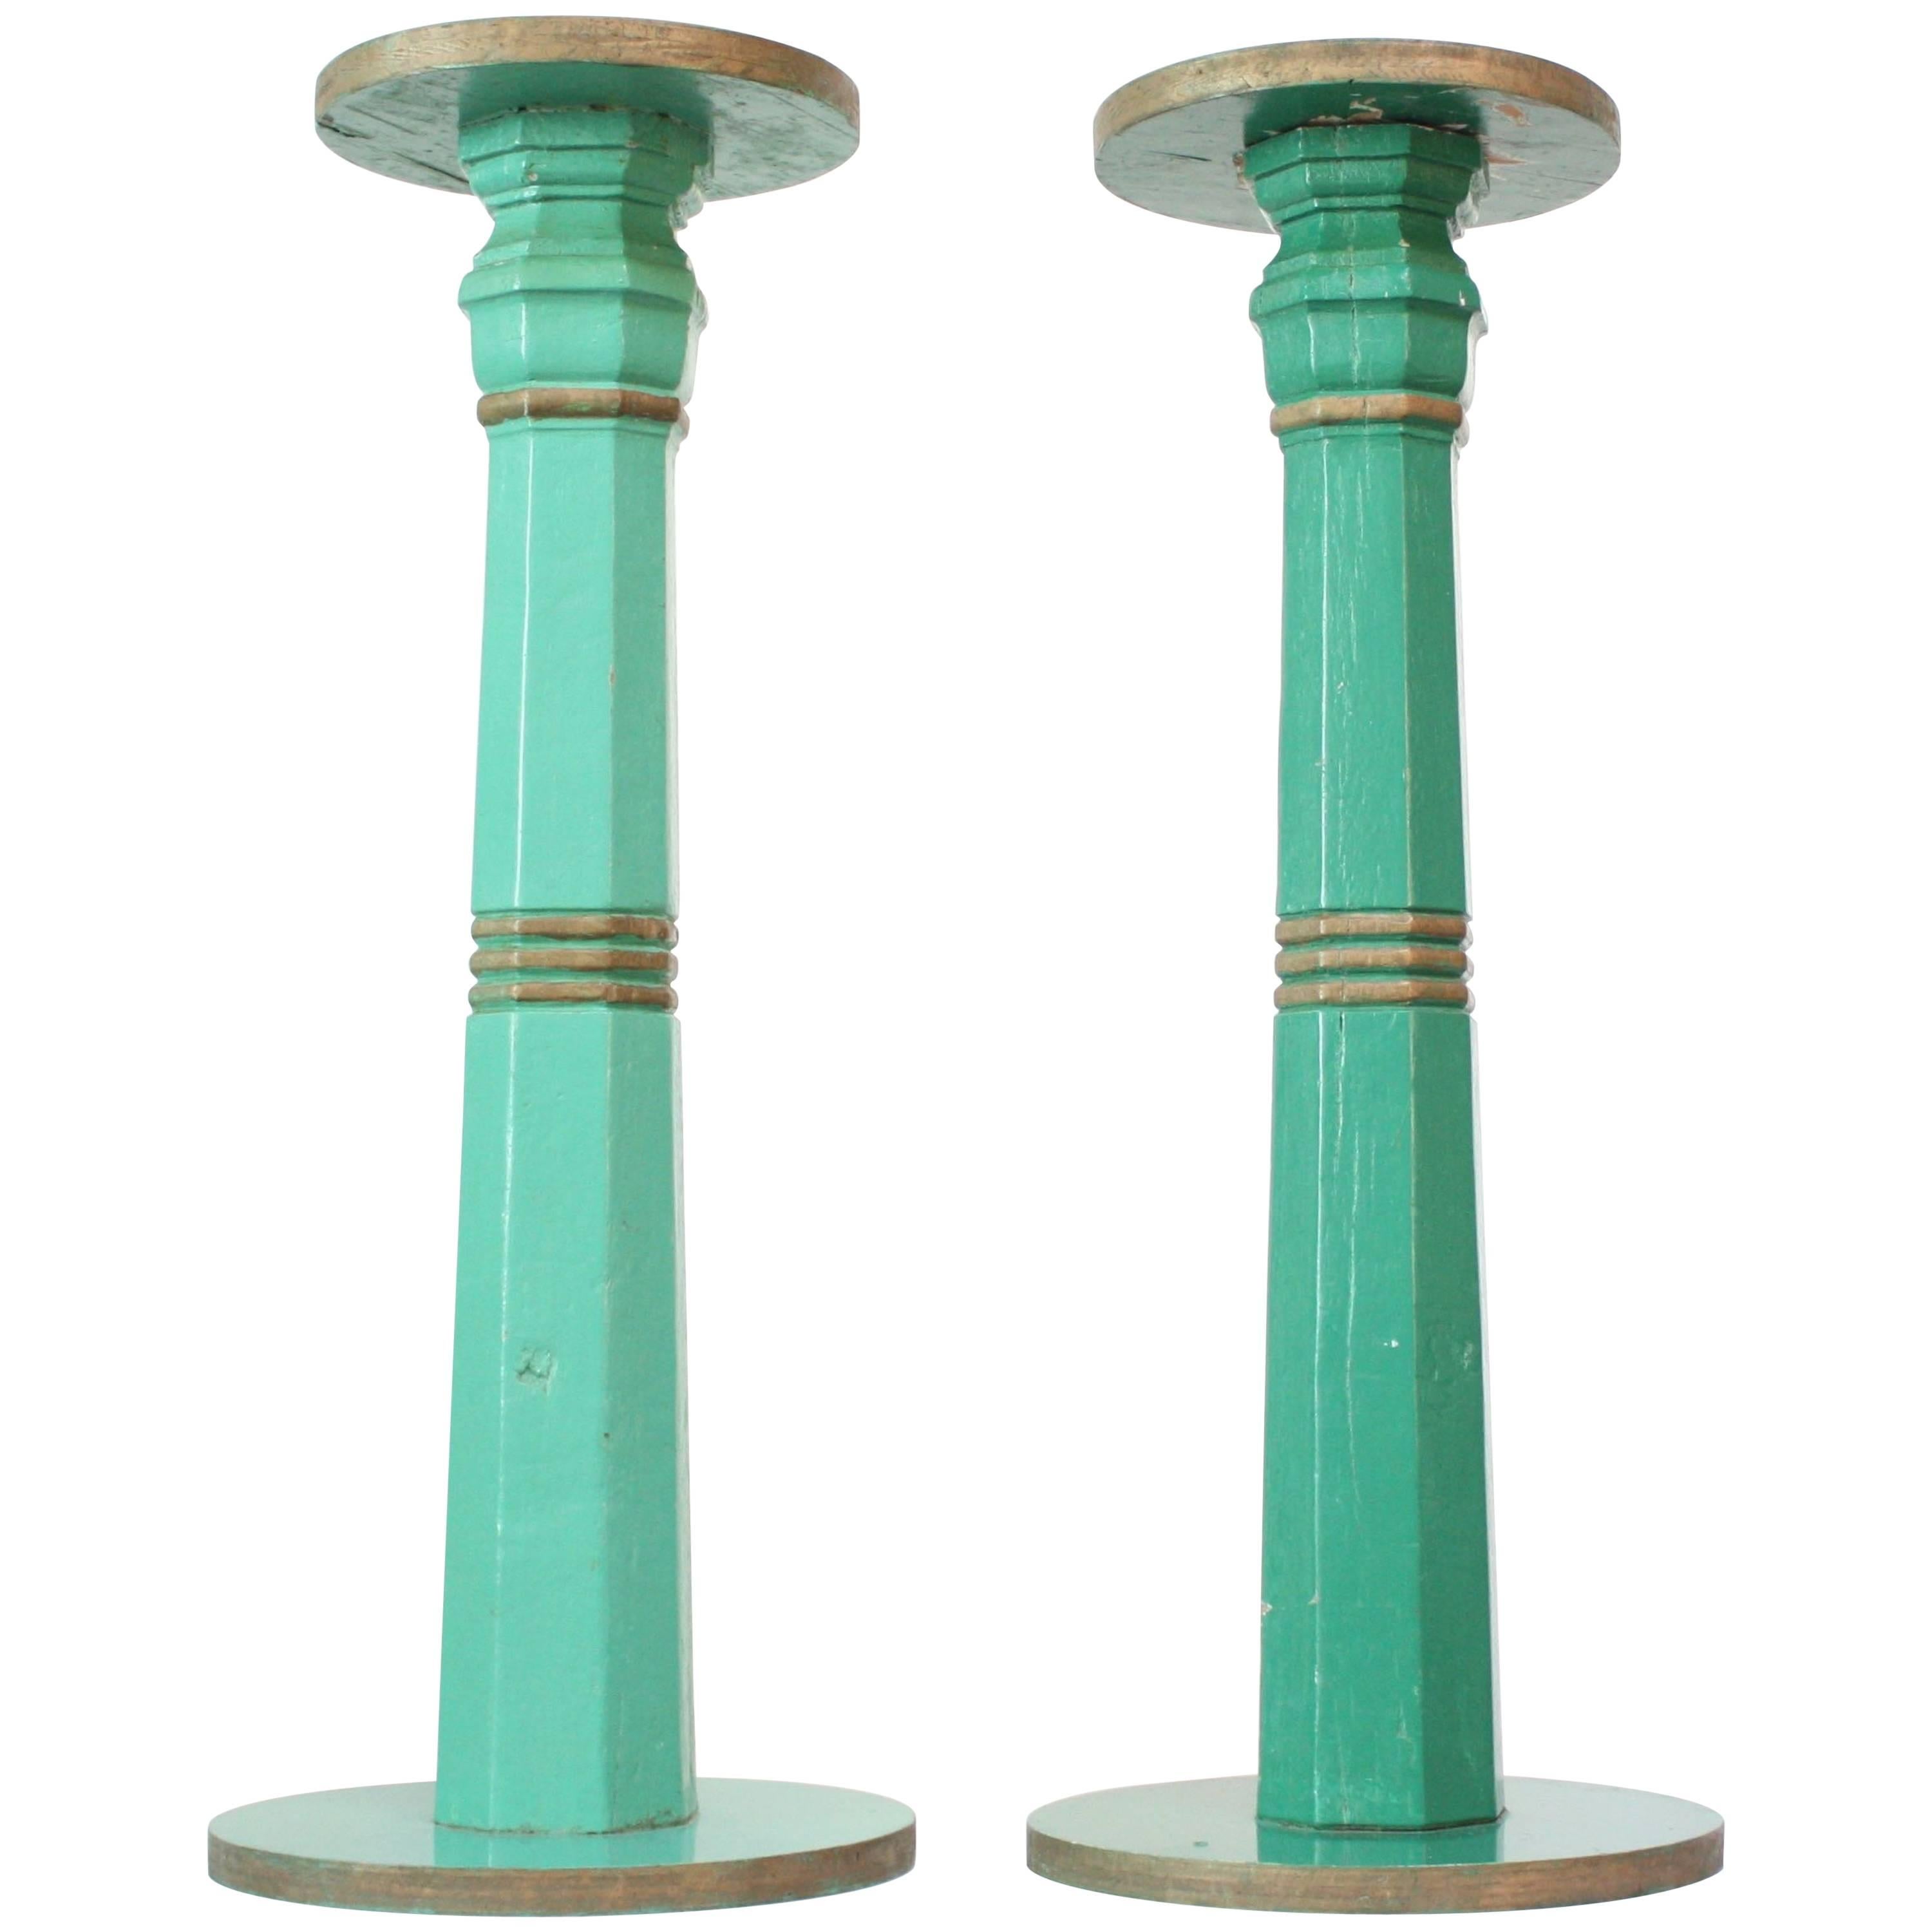 Pair of Mid-20th Century Primitive Pedestals in Mint Green